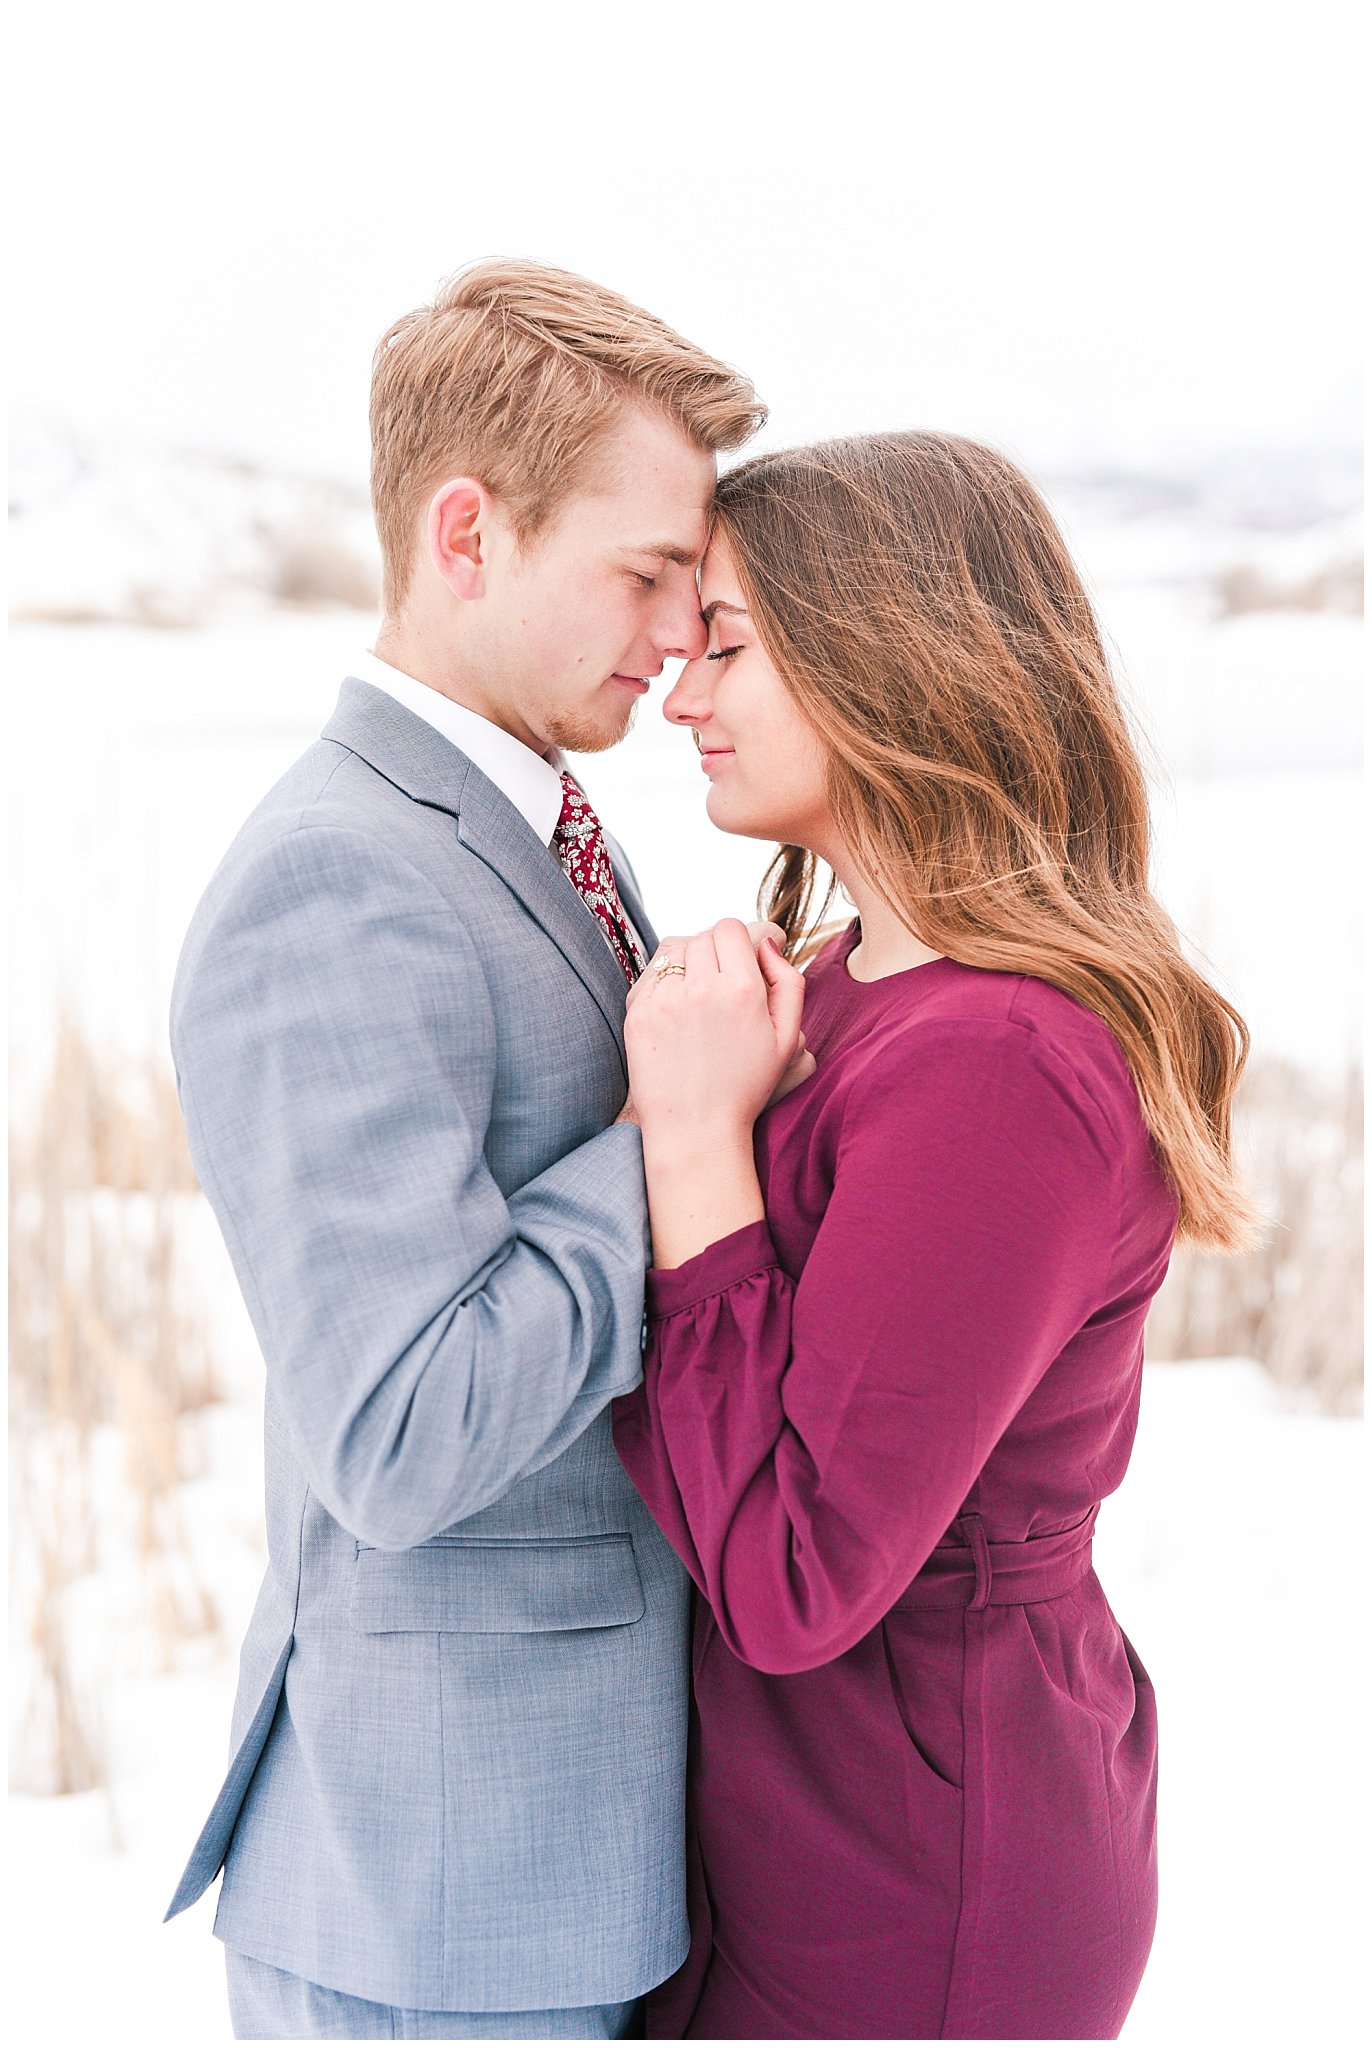 Couple dressed up in wine colored dress and light blue suit in the snowy Utah mountains | Mountain Green Winter Engagement | Jessie and Dallin Photography